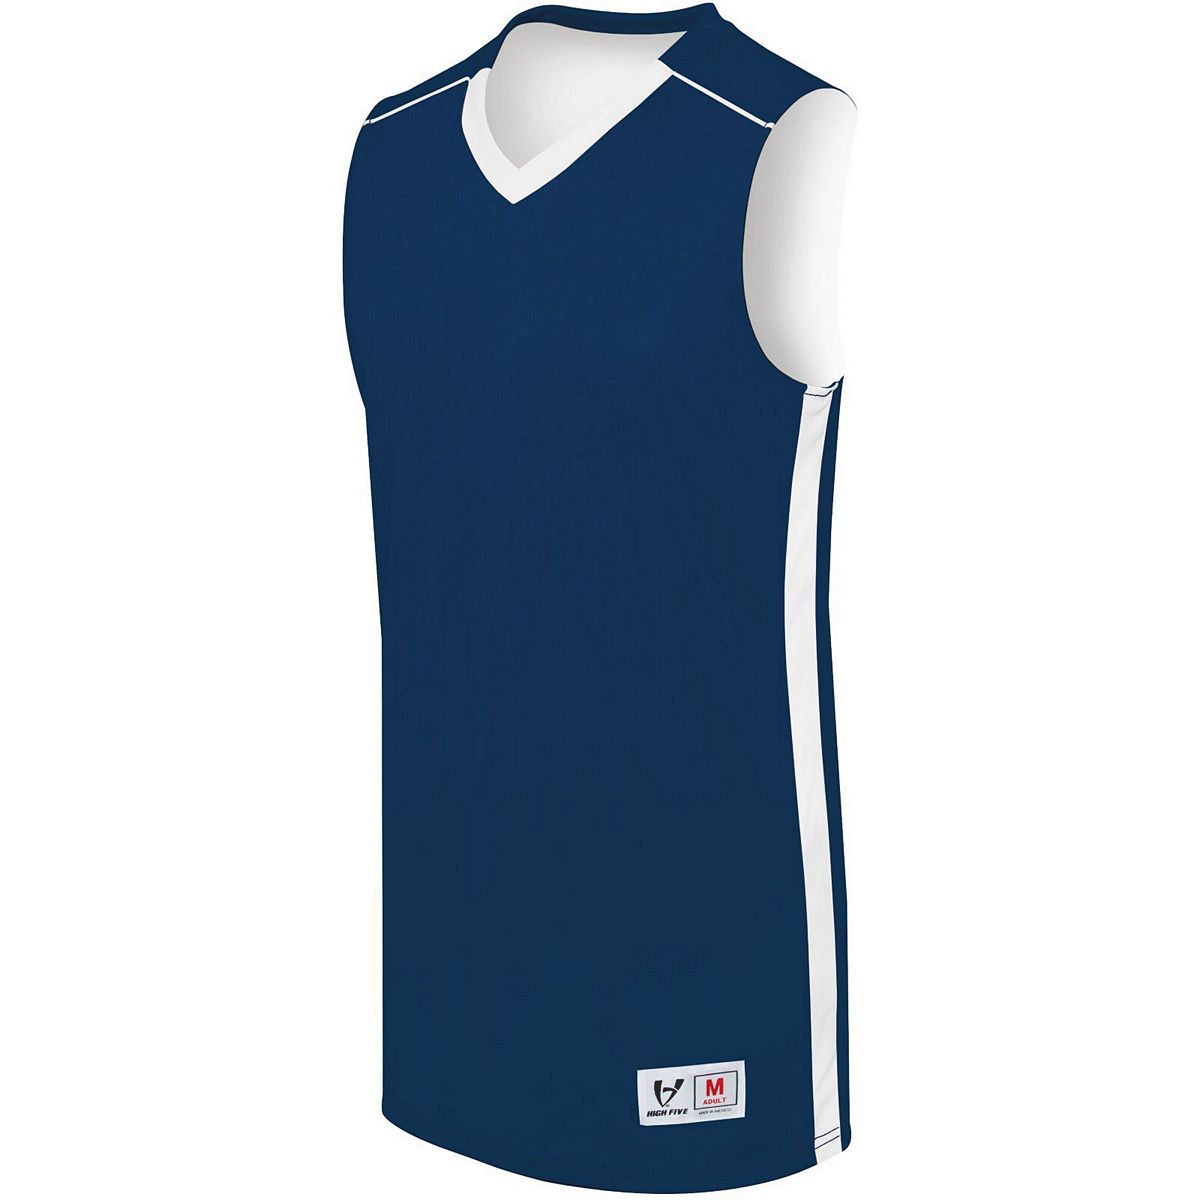 Augusta Sportswear Adult Competition Reversible Jersey in Navy/White  -Part of the Adult, Adult-Jersey, Augusta-Products, Basketball, Shirts, All-Sports, All-Sports-1 product lines at KanaleyCreations.com